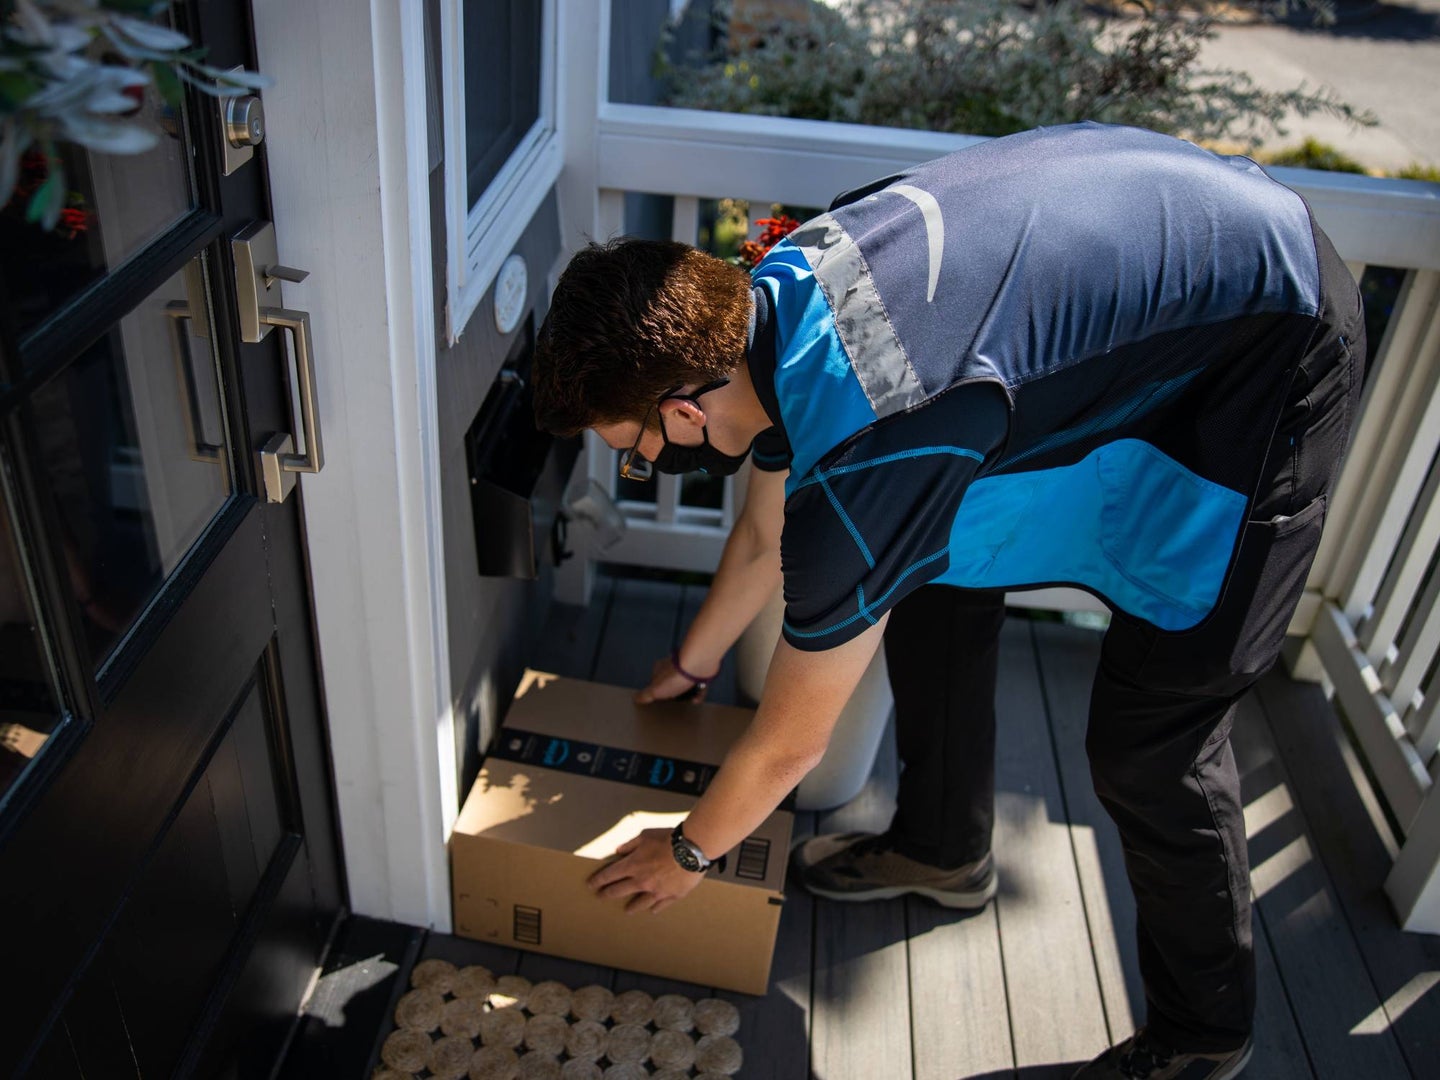 An Amazon delivery man putting an Amazon package on a porch in front of a door during the daytime.